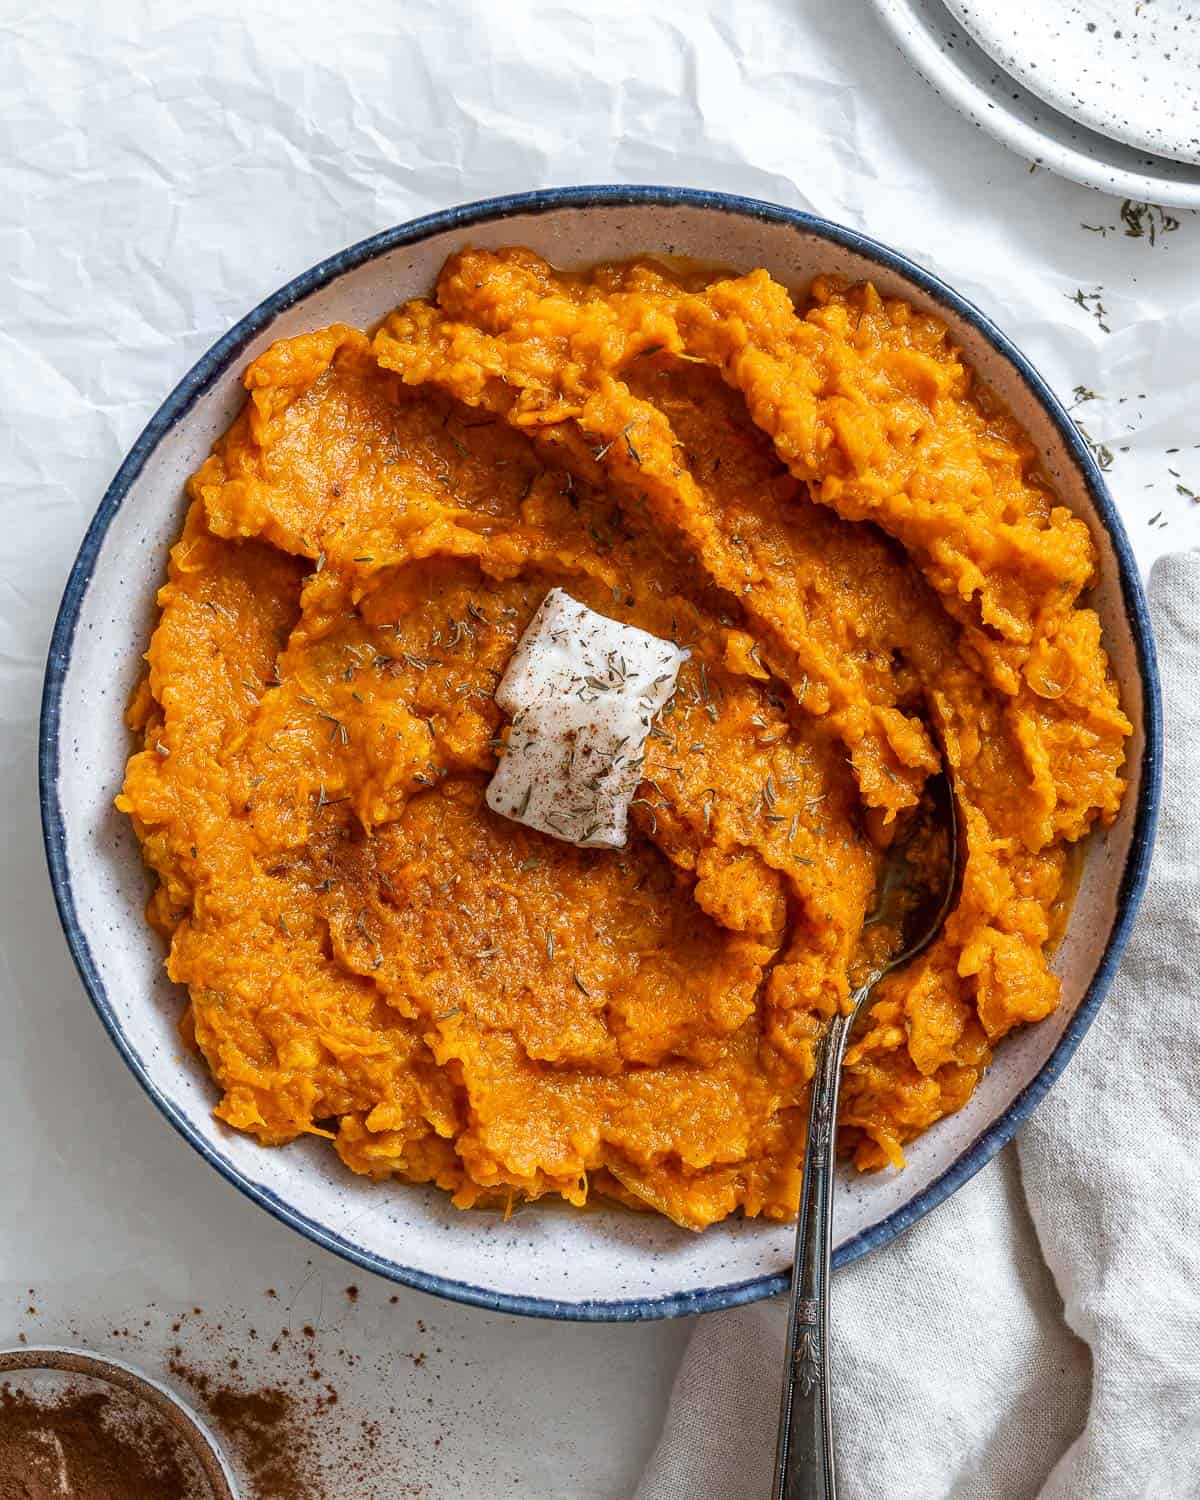 Cooked mashed vegan sweet potatoes with a slice of vegan butter on top. In a white bowl with a blue rim and a silver spoon on top. On a white crinkled paper with a white cloth napkin in the right bottom corner and cinnamon in the left corner,